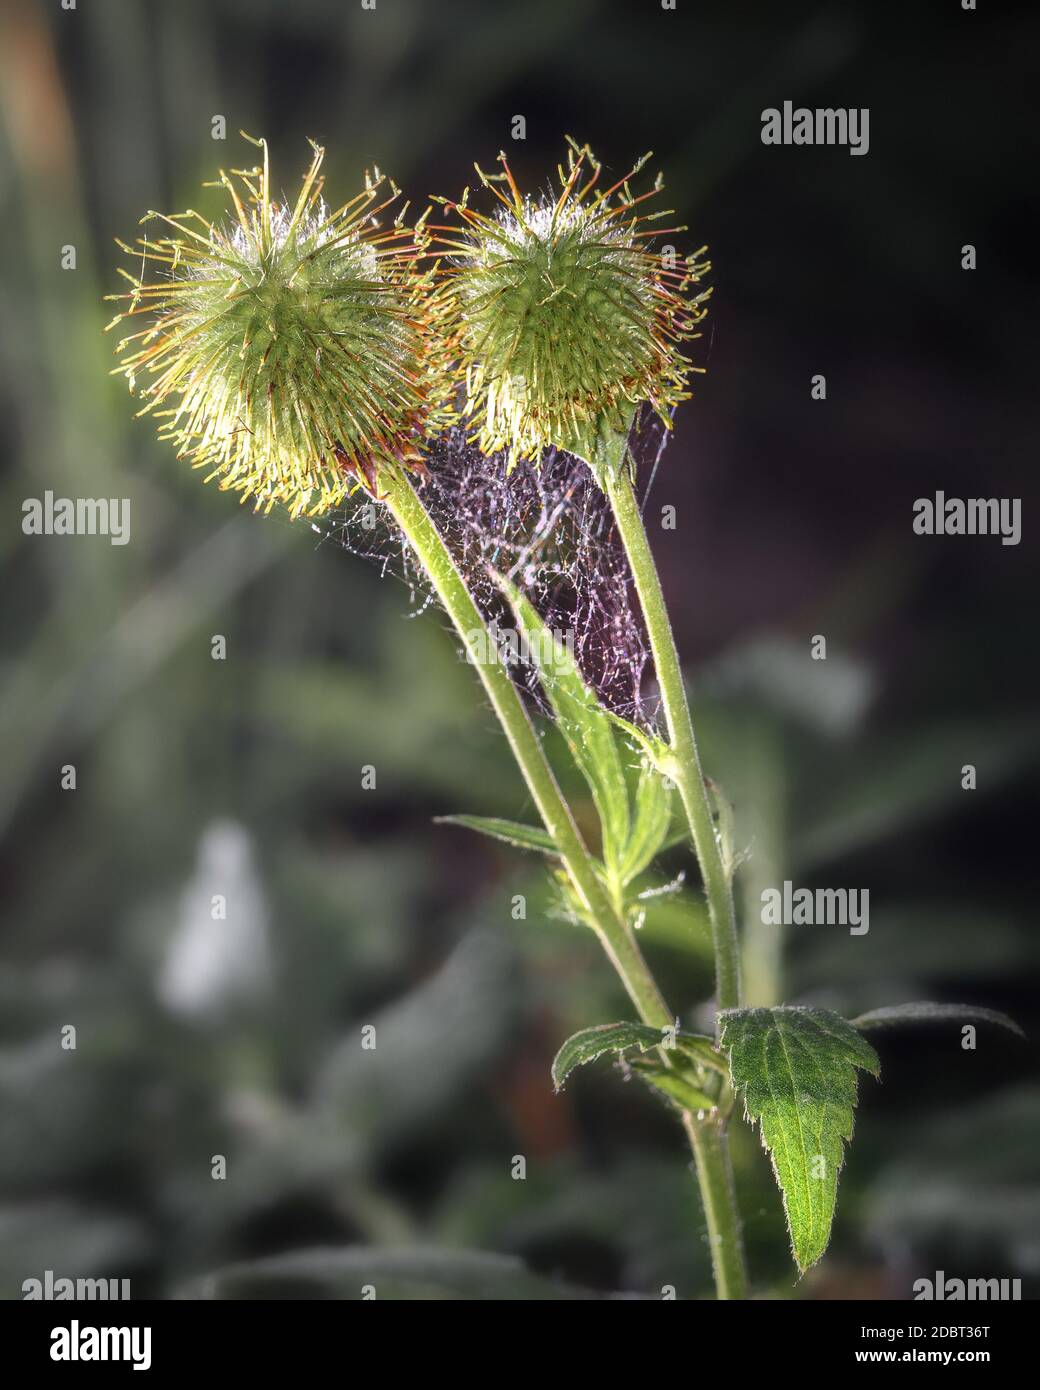 two green fruits of a young Thistle, held together by a web, close-up Stock Photo